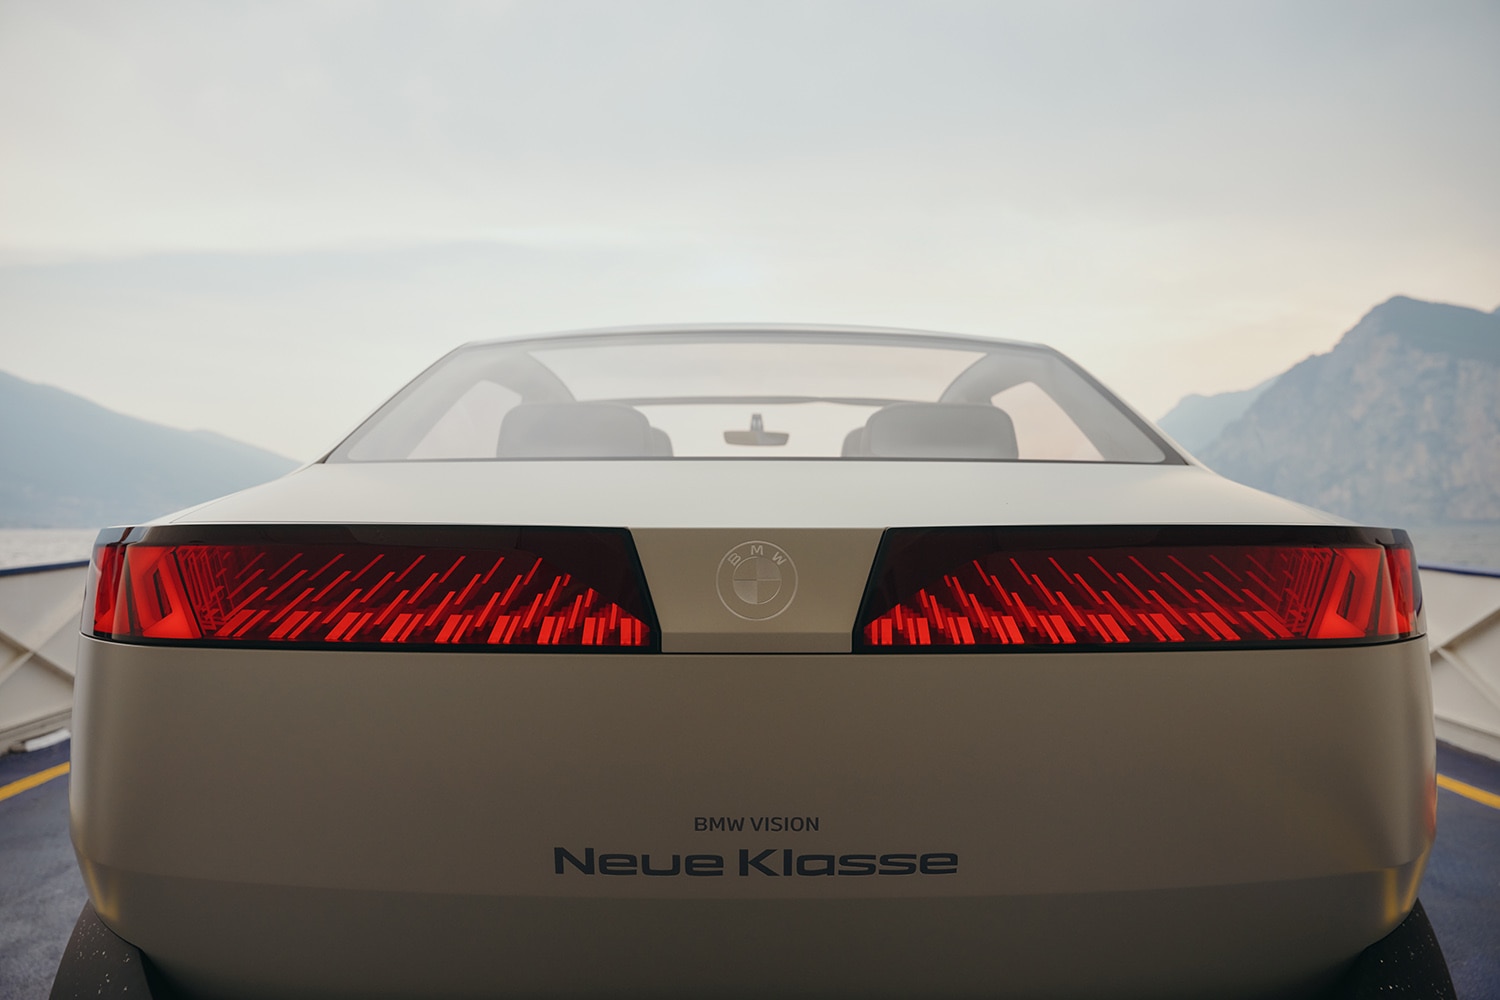 BMW Vision Neue Klasse in Joyous Bright off-white, close rear view of the taillights